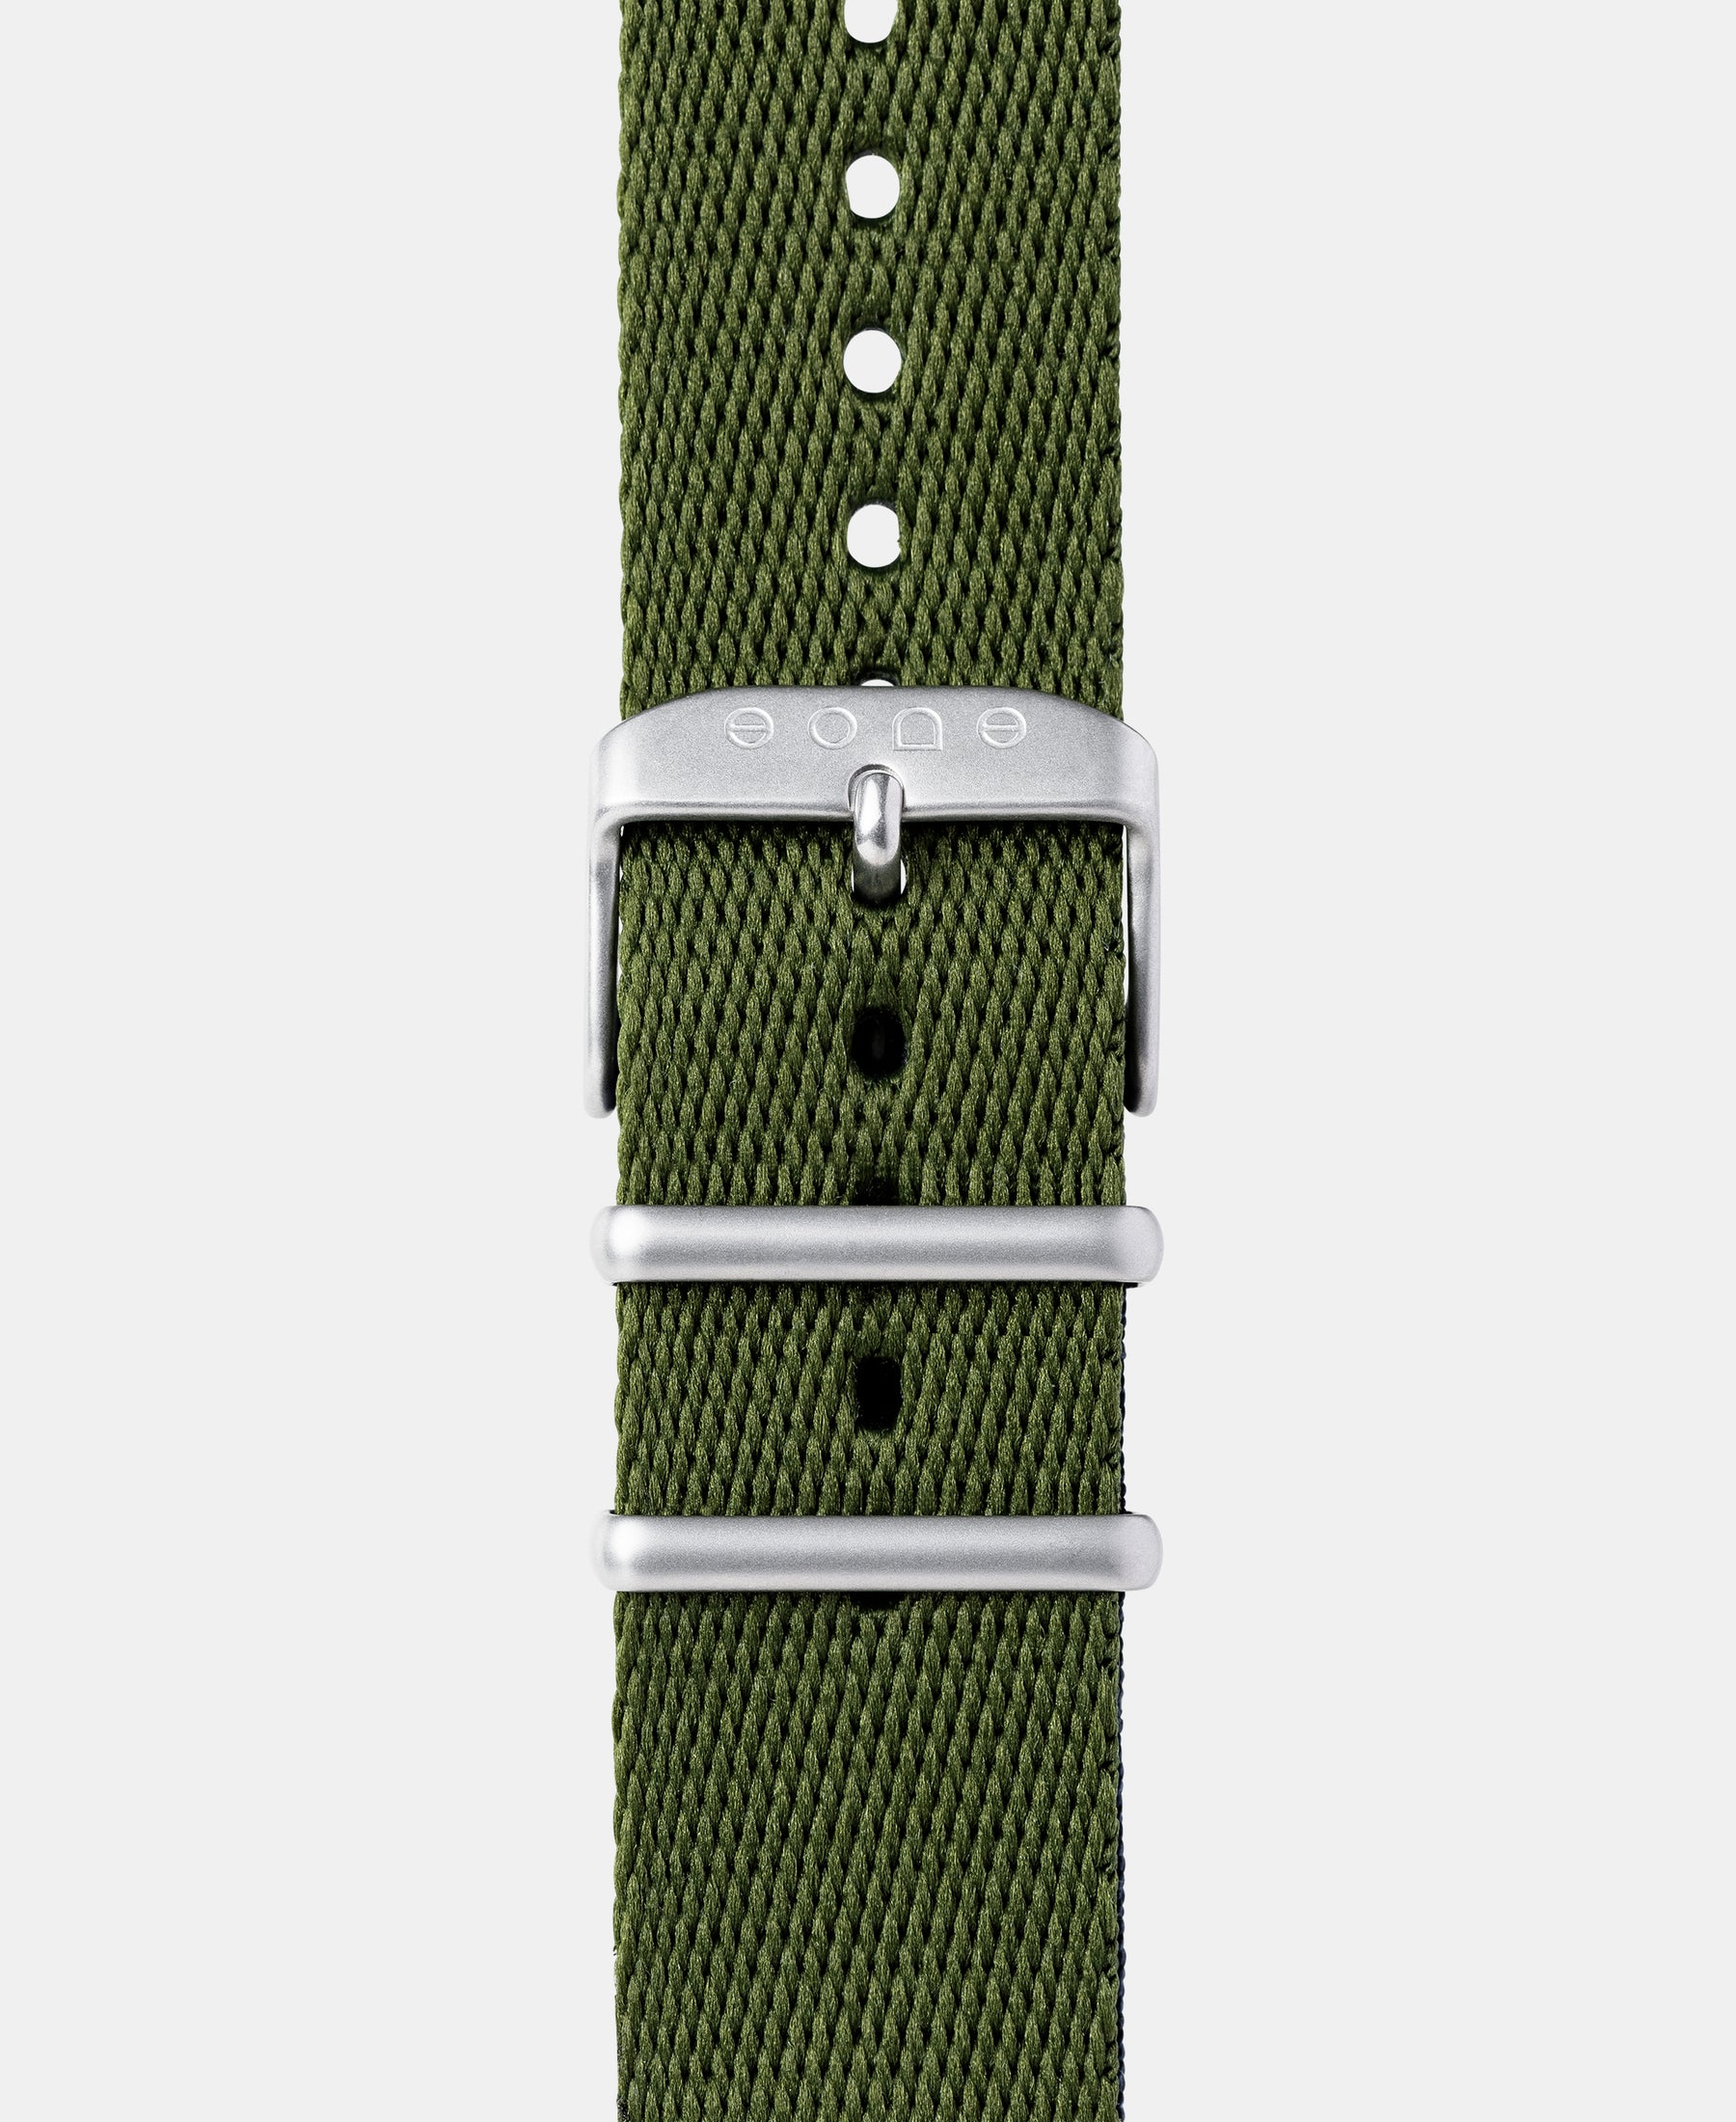 Load image into Gallery viewer, A photo shows the strap lying on a flat surface. One part has a buckle and the other part has a series of holes for an adjustable fit.